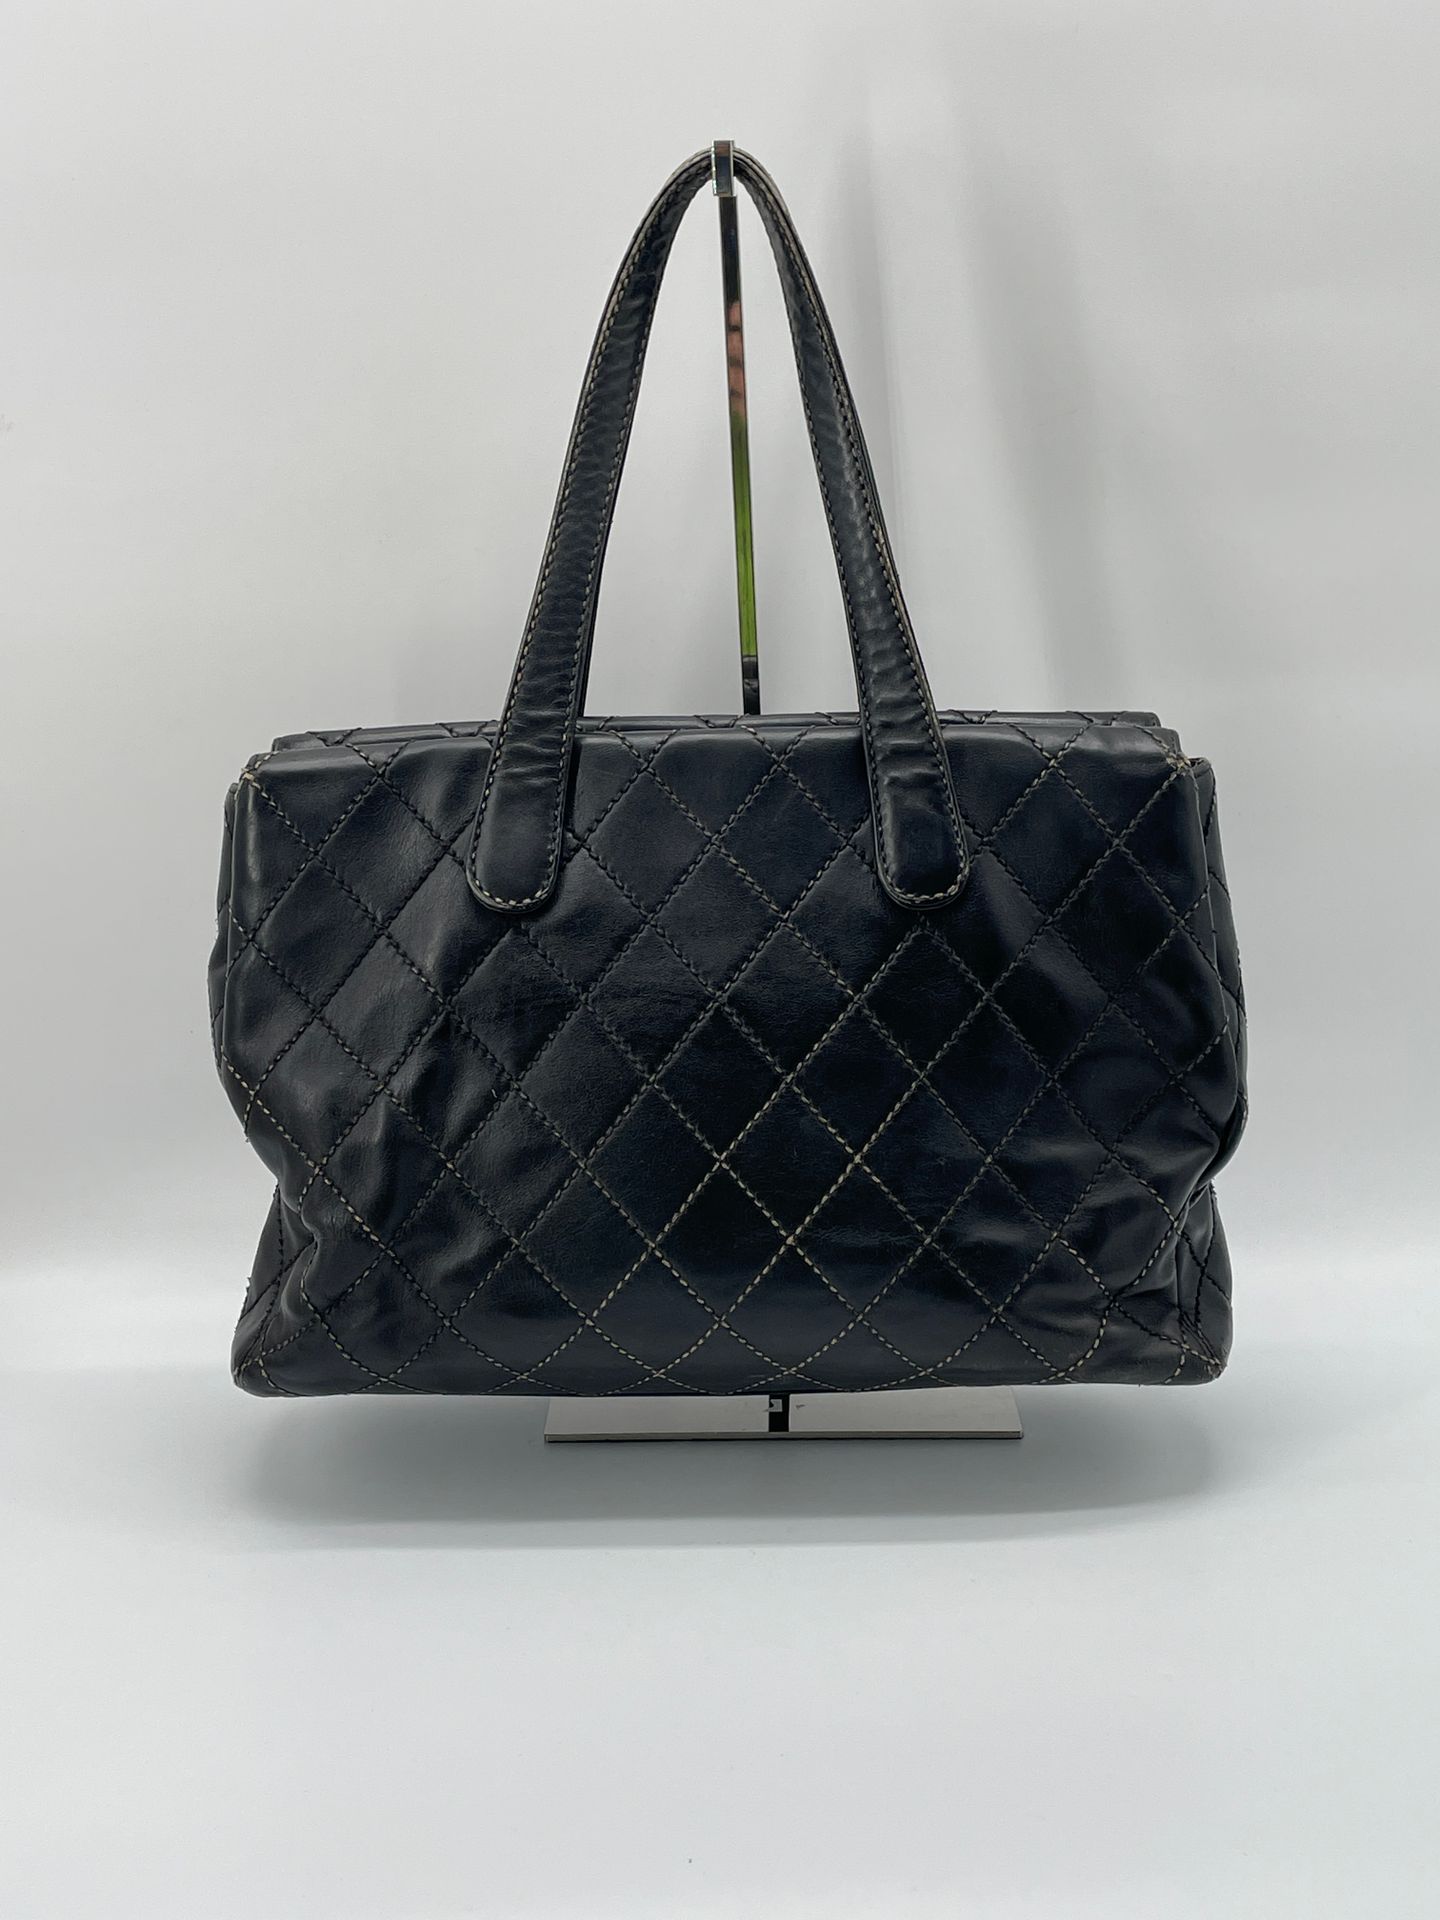 Null CHANEL
Wild Stitch handbag, in black quilted leather with stitched decorati&hellip;